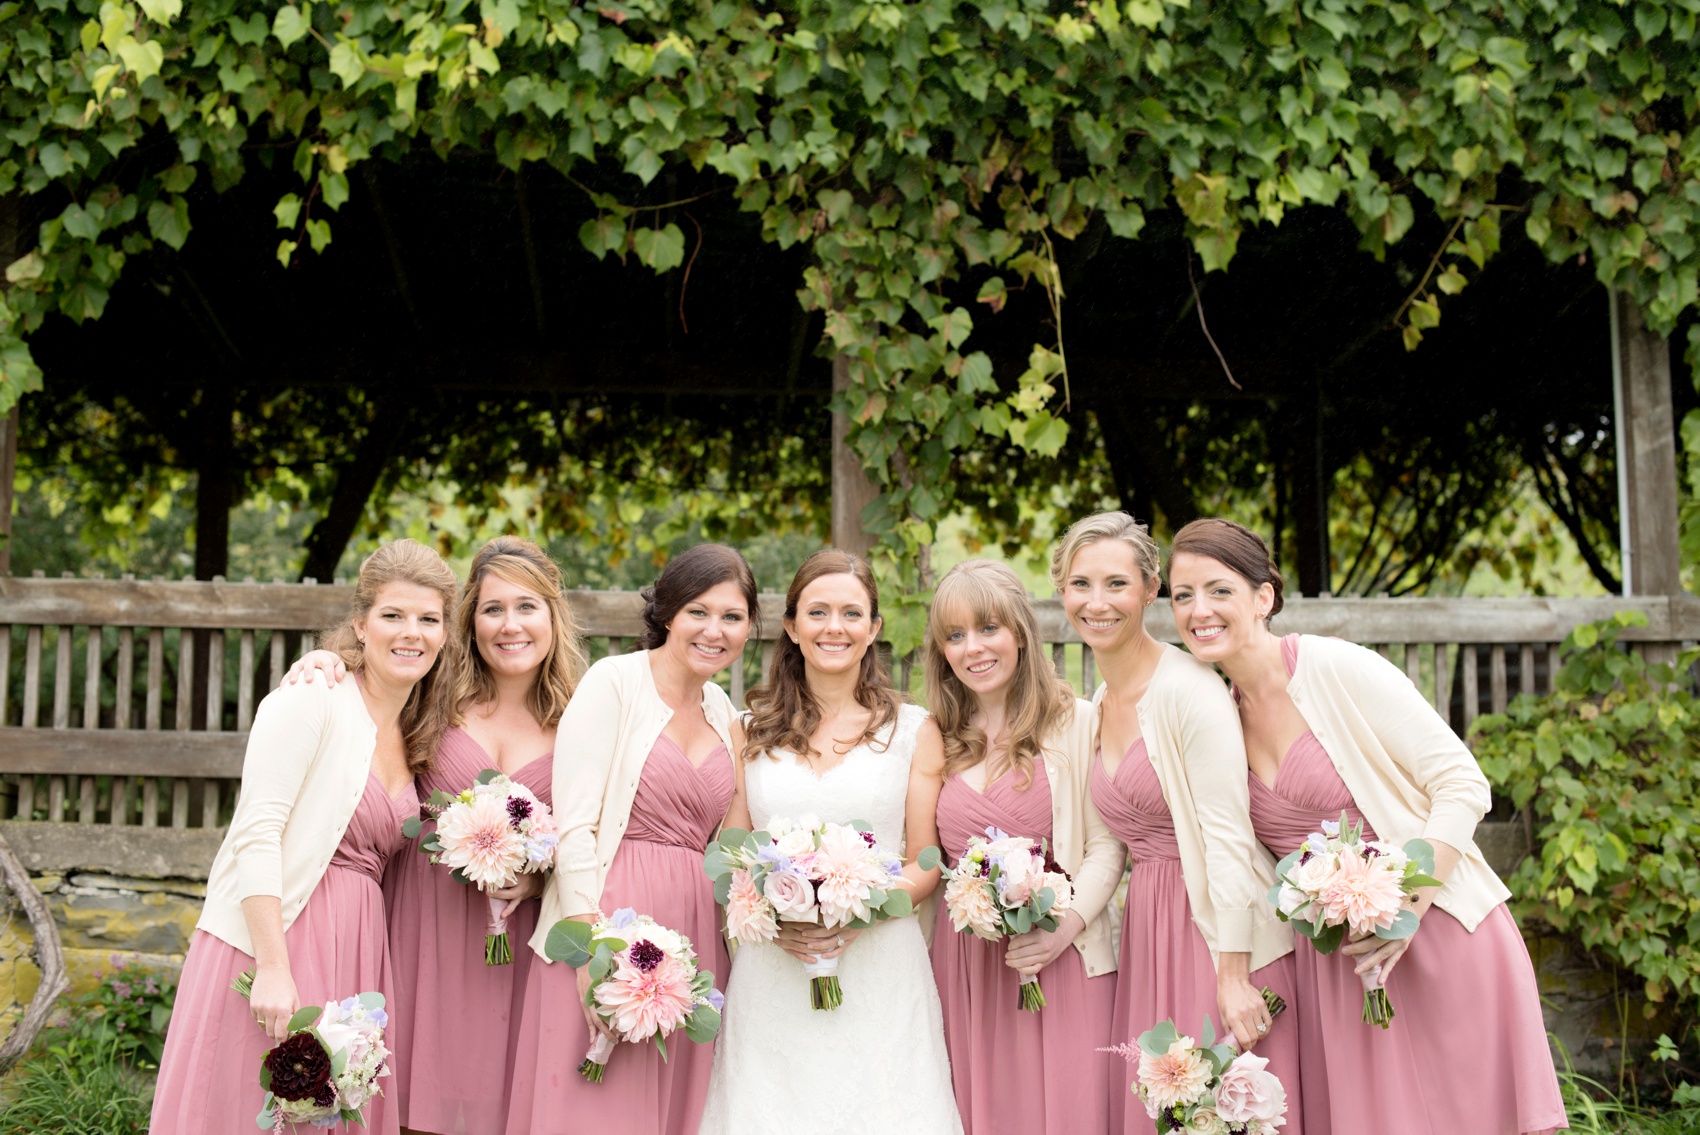 A Red Maple Vineyard wedding with dusty rose short dress bridesmaid and dahlia bouquets. Photo by NYC wedding photographer Mikkel Paige Photography.